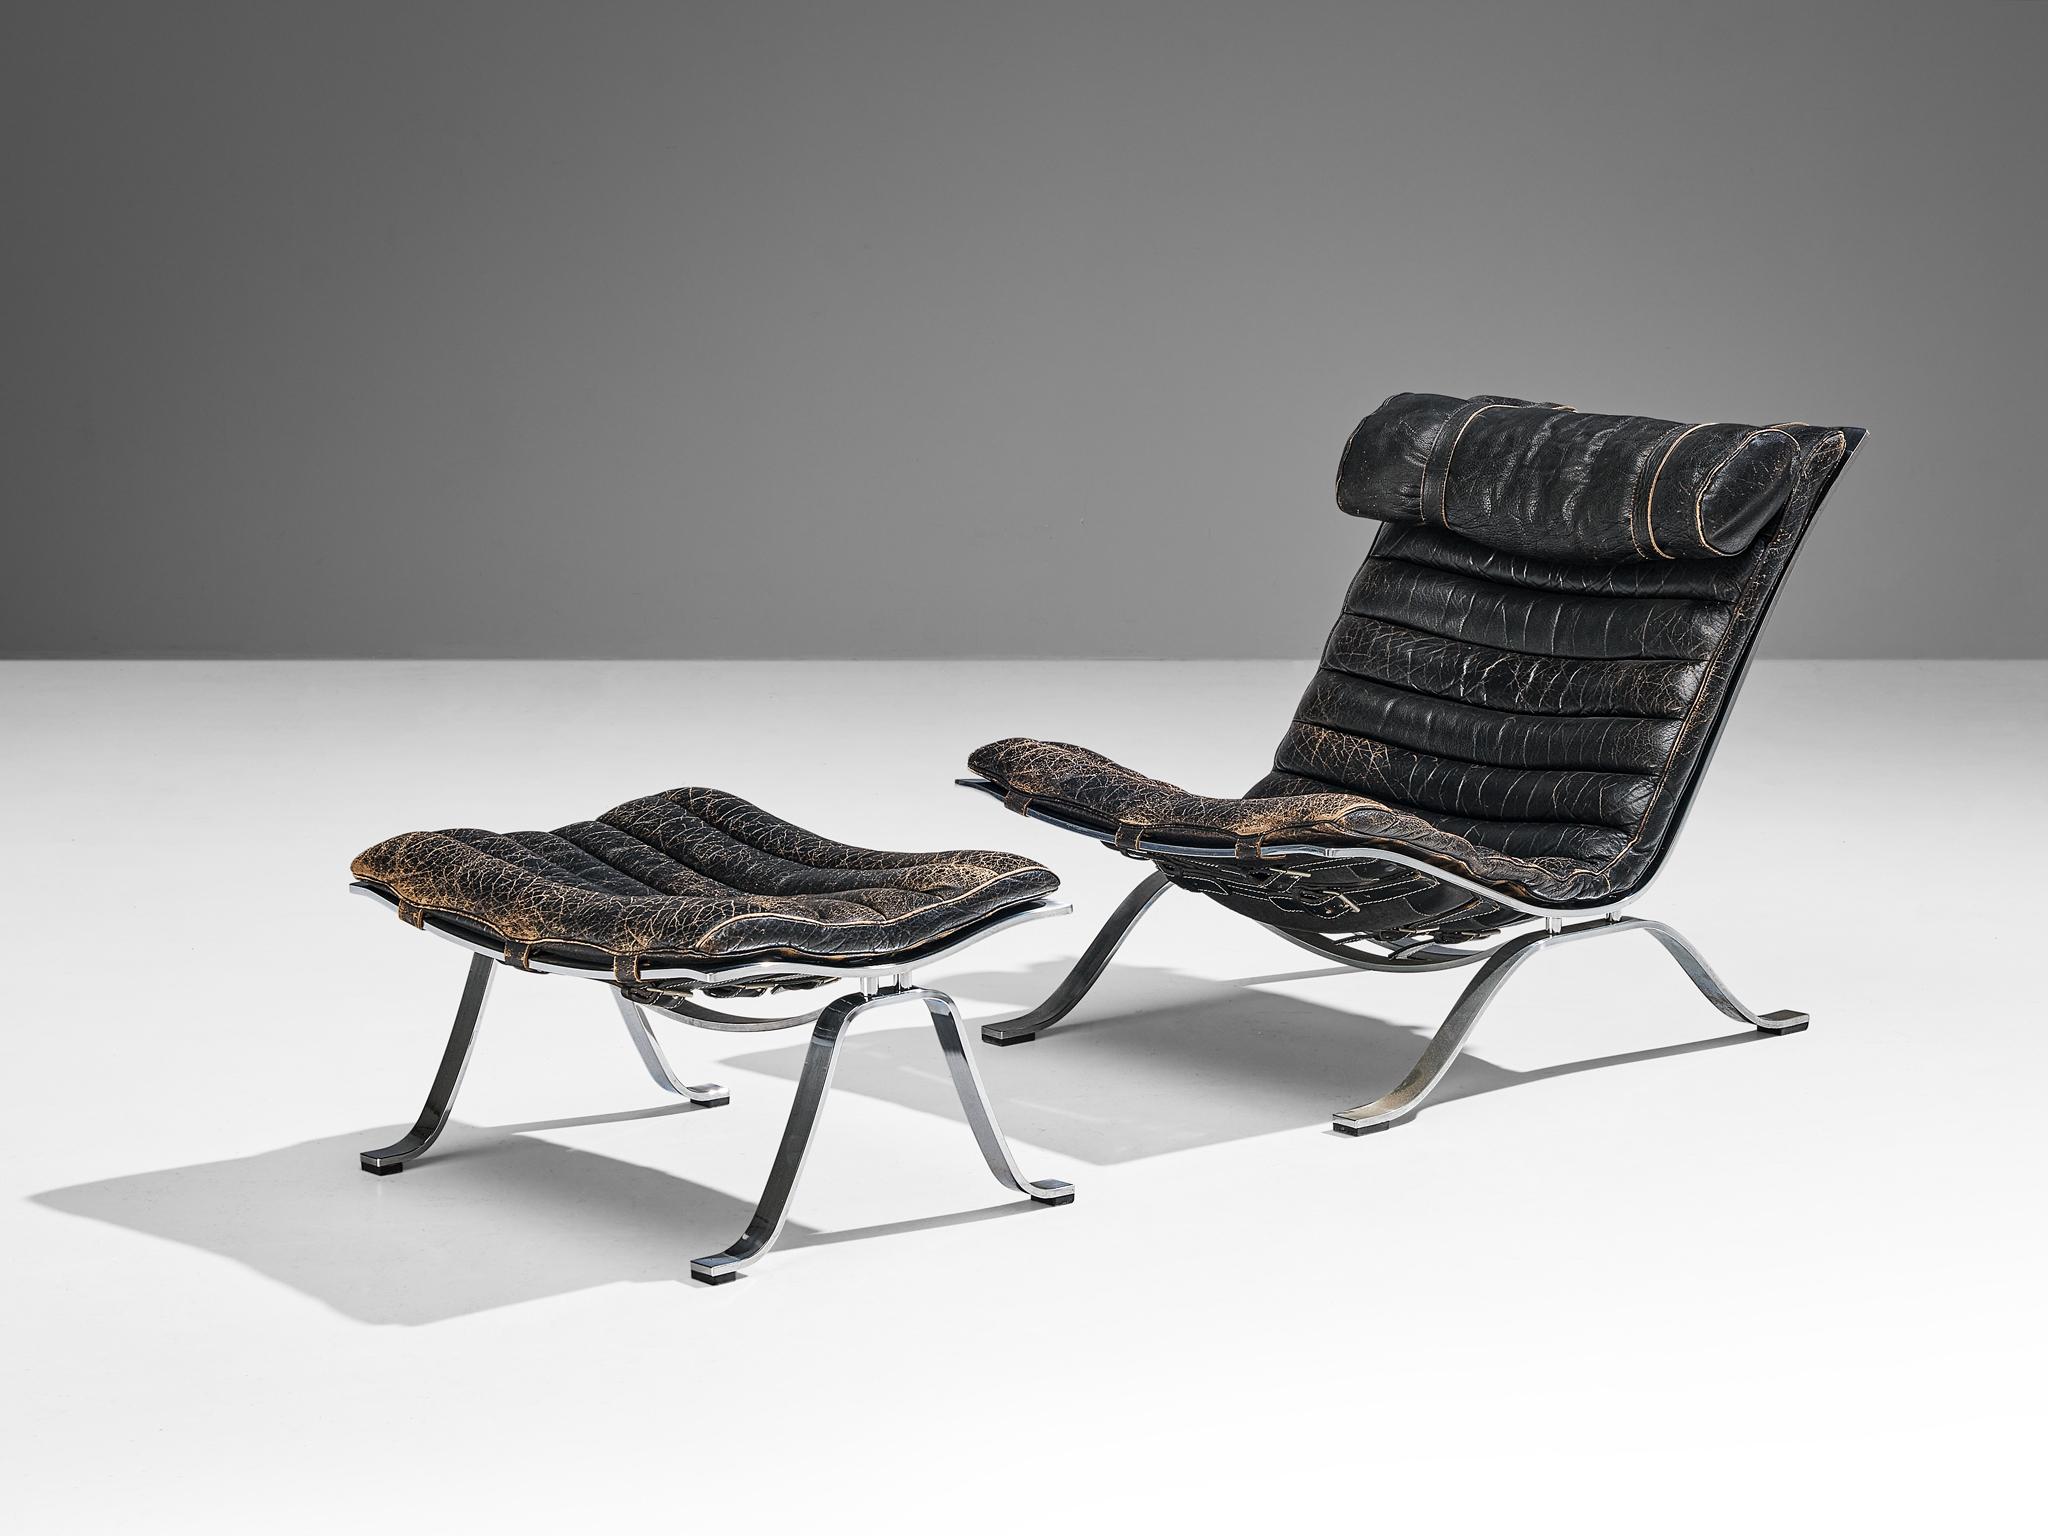 Arne Norell for Norell Møbel AB, 'Ari' lounge chair and ottoman, patinated black leather, chrome-plated steel, Denmark, 1966

The lounge chair and accompanying ottoman, known as the 'Ari' model, were designed by the esteemed Arne Norell